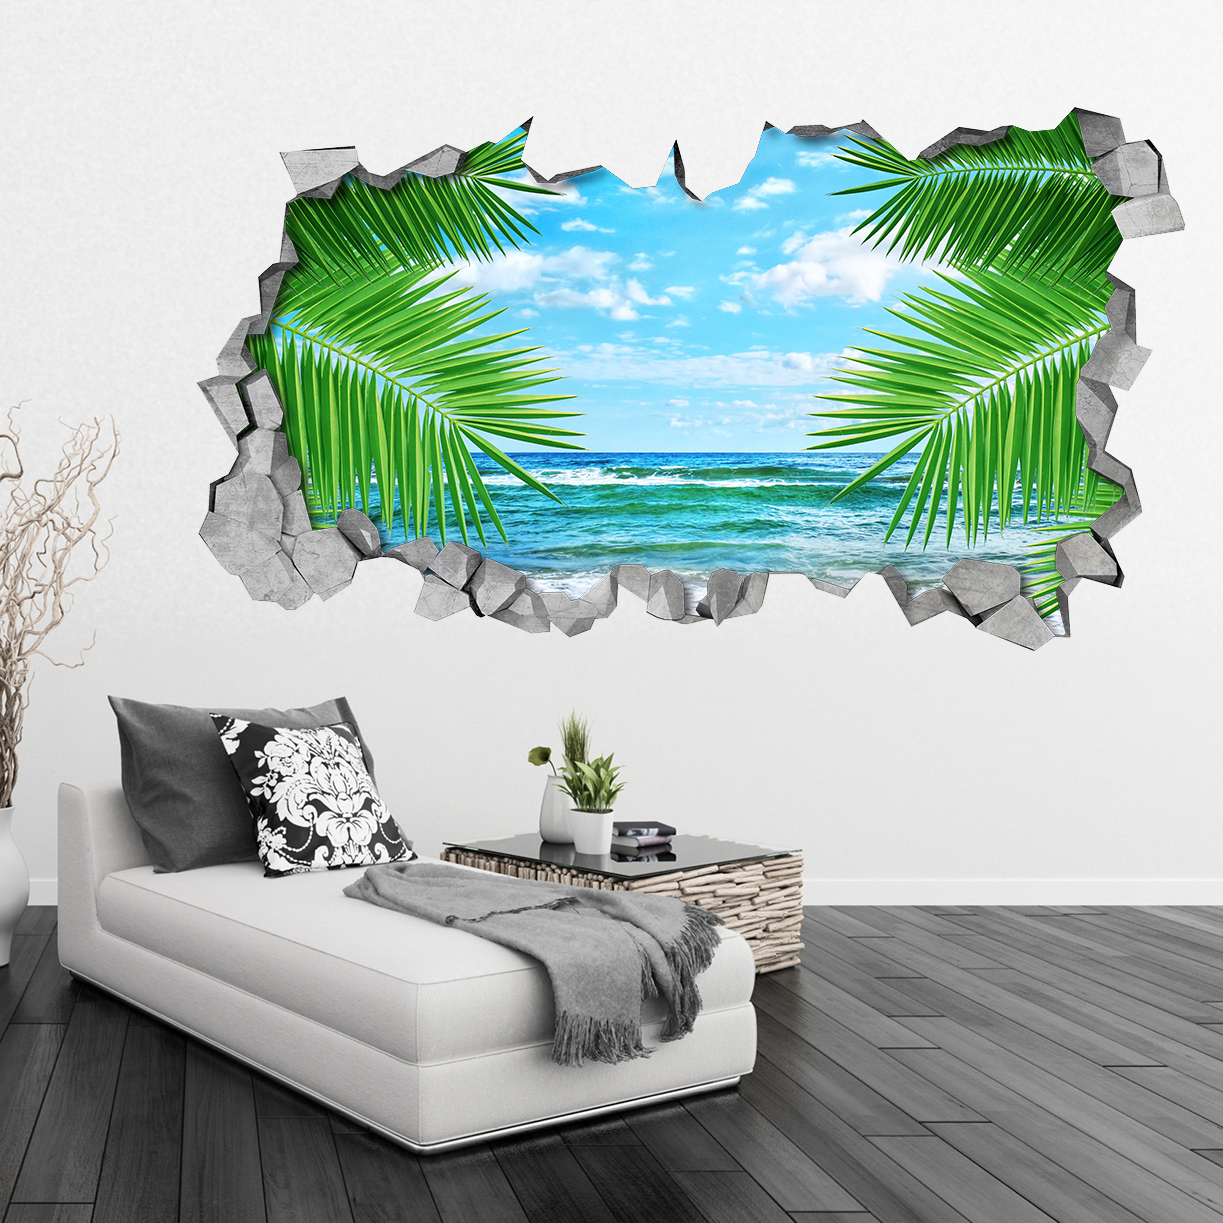 Leaf Sea 3d Wall Wall Decor - 3d Travel Stickers For Wall - HD Wallpaper 